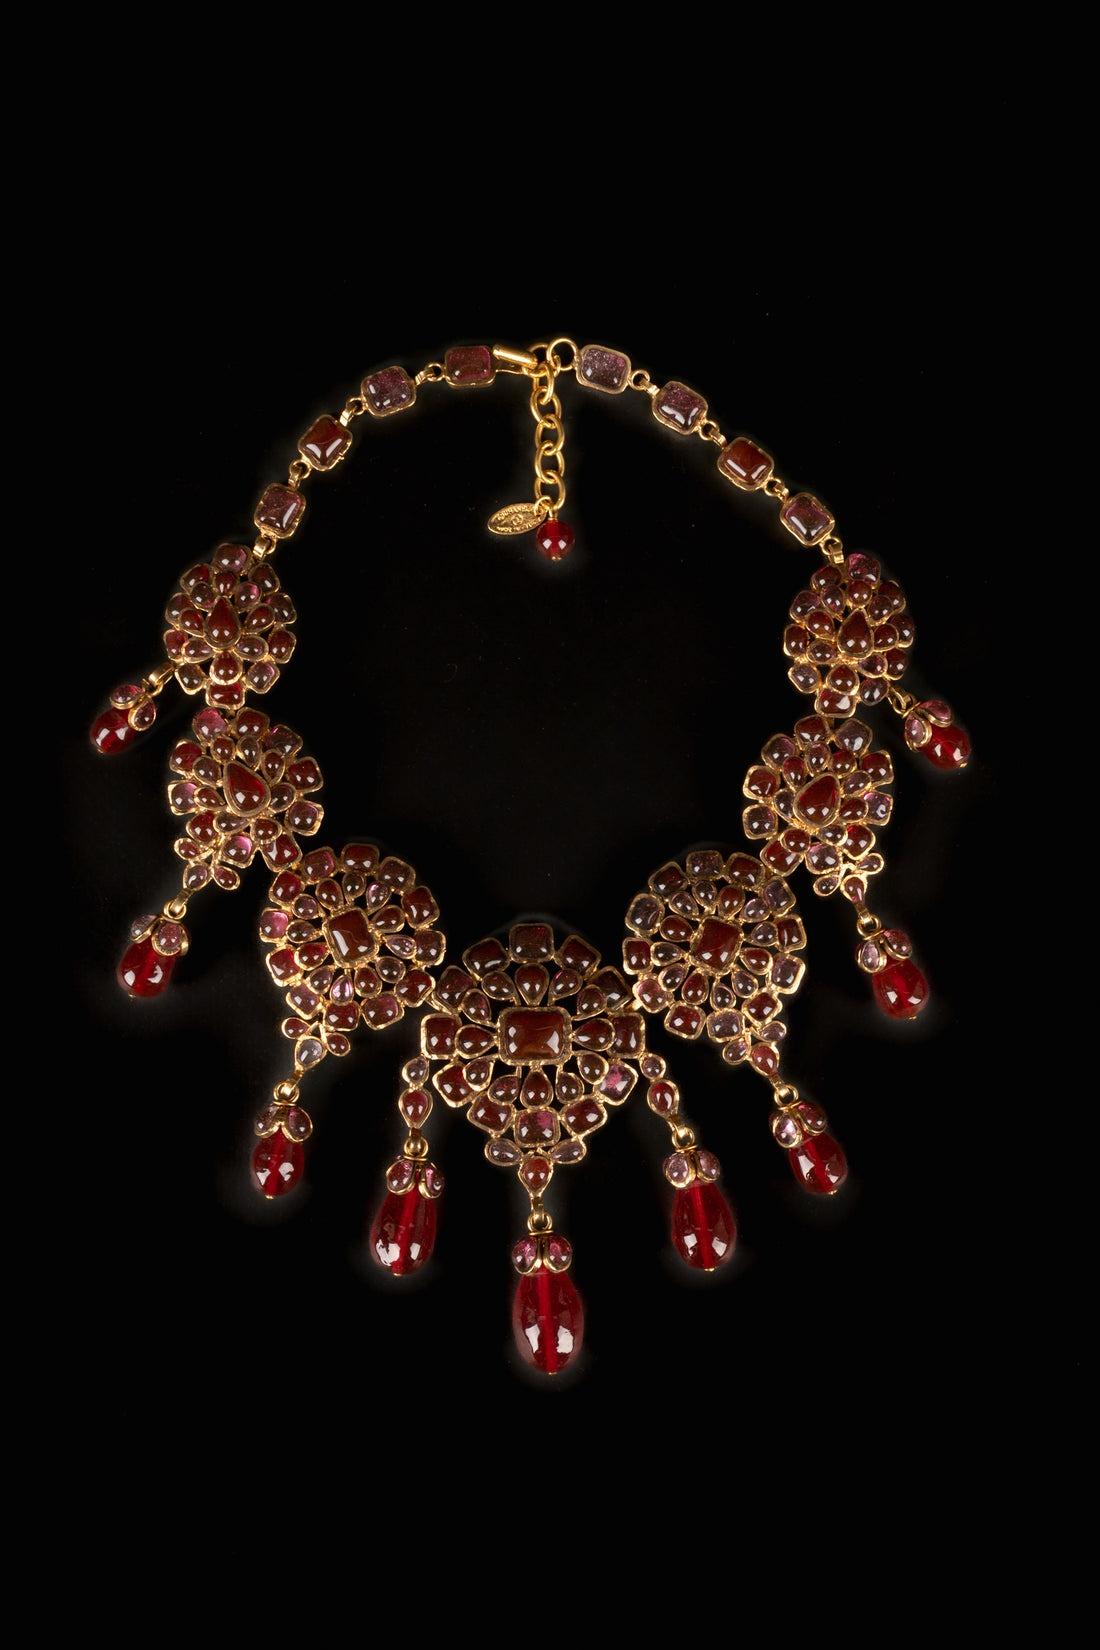 Chanel - (Made in France) Golden metal necklace with red glass paste. Jewelry from the 1980s.

Additional information:
Condition: Very good condition
Dimensions: Length: from 39 cm to 42 cm
Period: 20th Century

Seller Reference: CB2